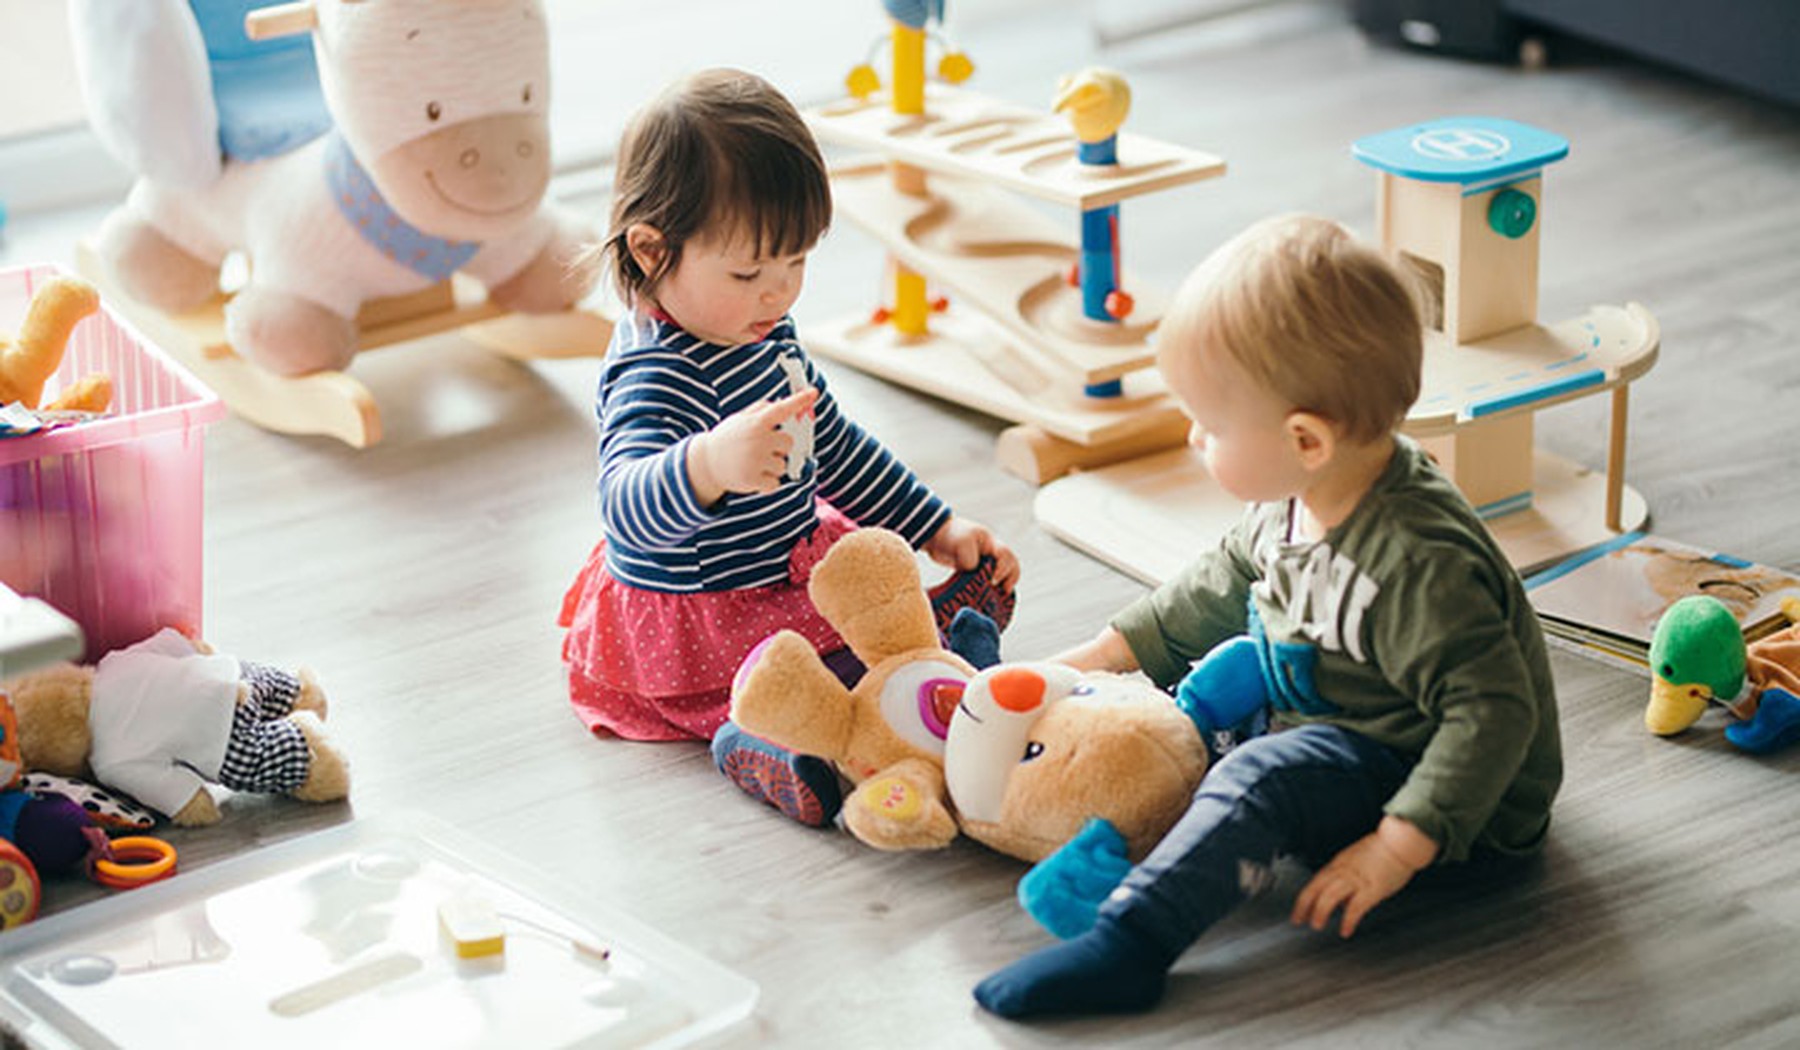 Boy and girl toddlers playing with toys